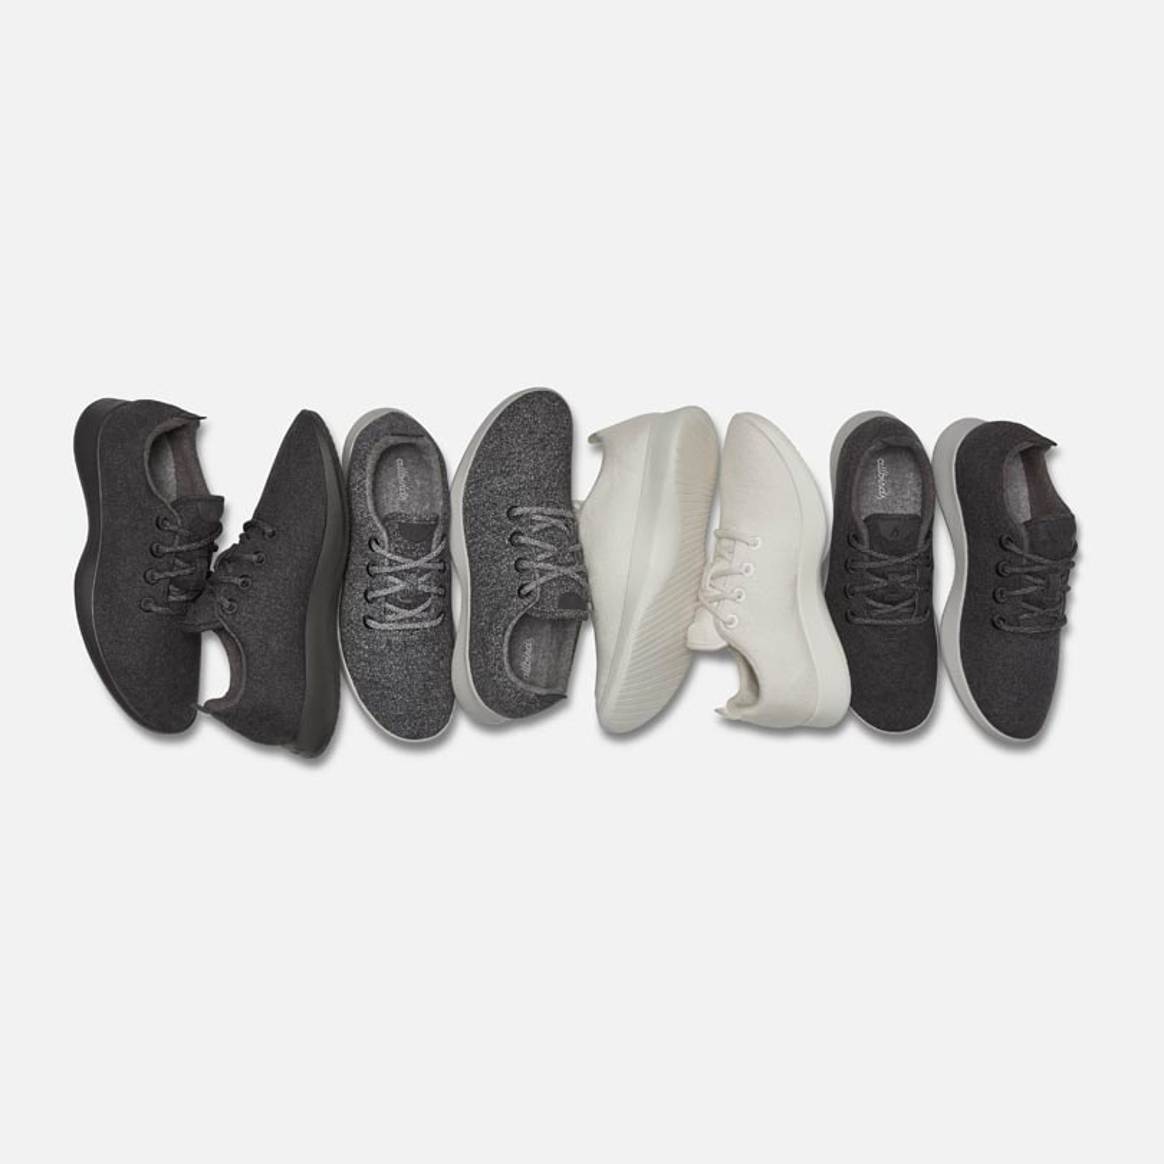 Allbirds to open first UK store